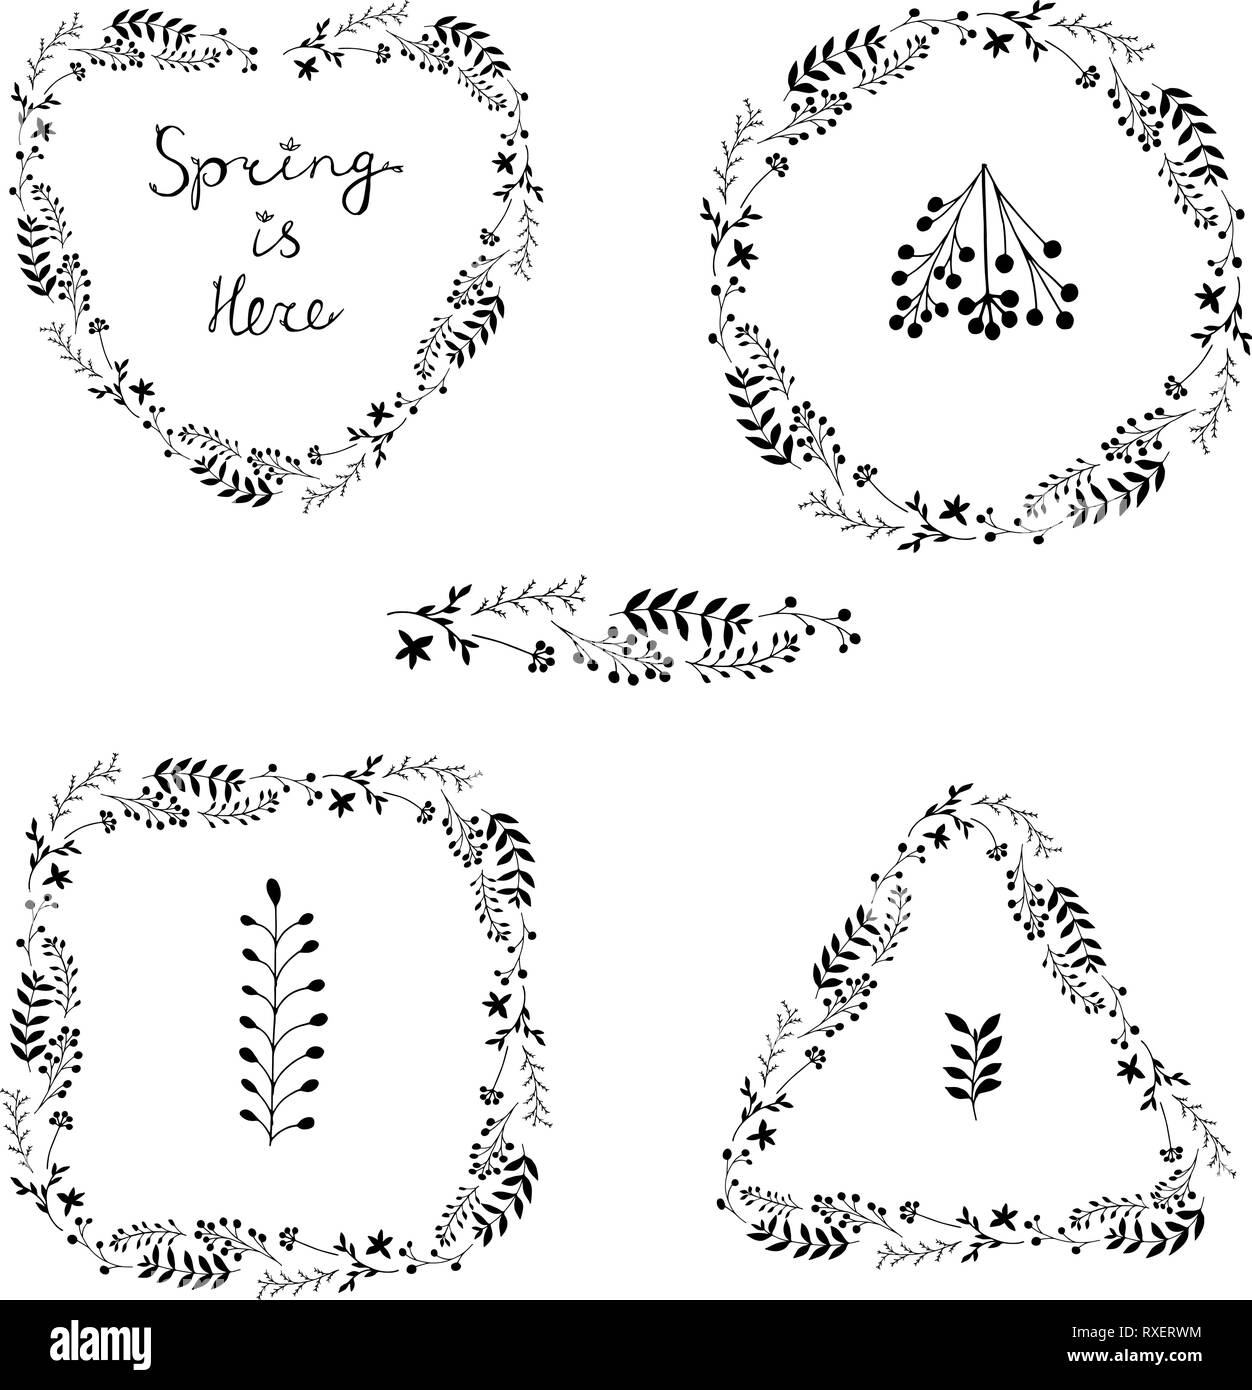 Beautiful vector set of black floral spring wreaths isolated on white background. Spring Is Here lettering. Botanical garland silhouettes. Stock Vector